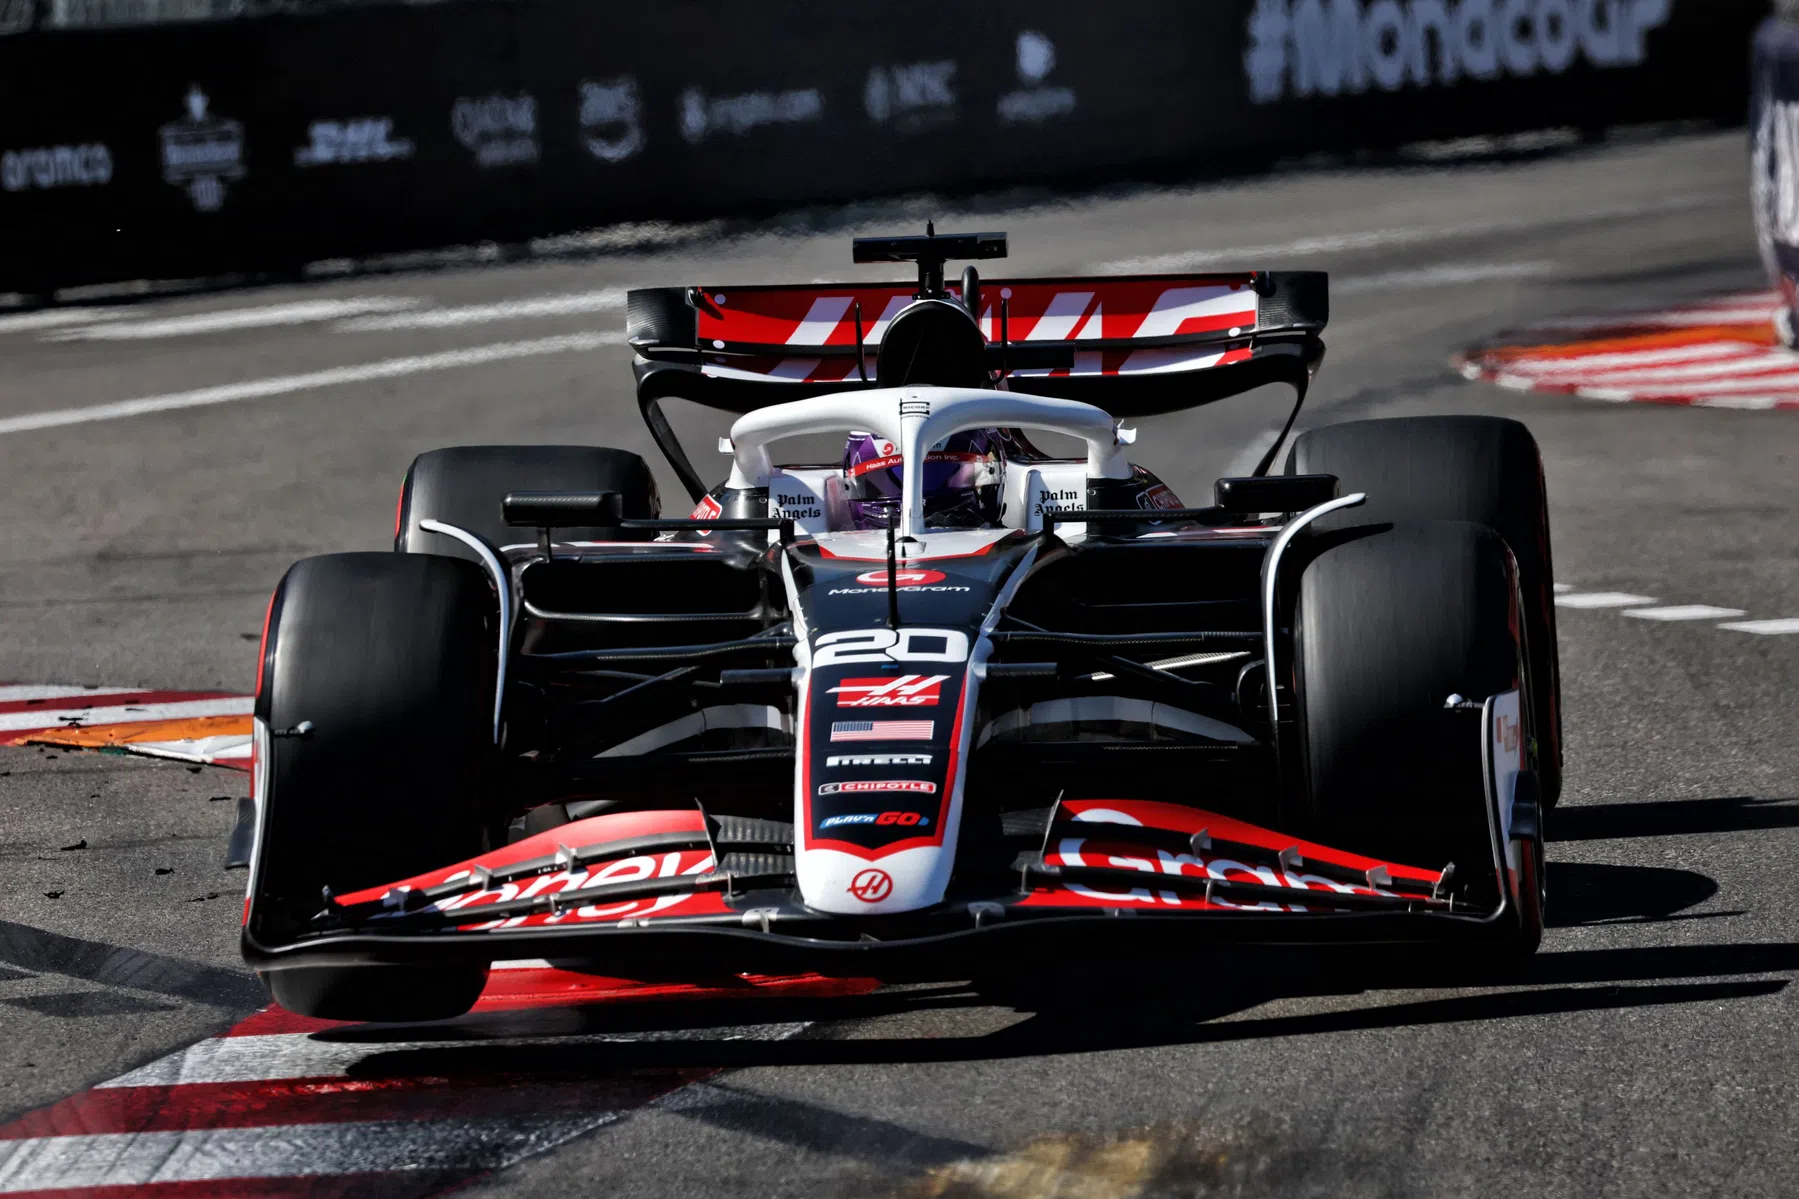 Haas team changes plans after monaco disqualification